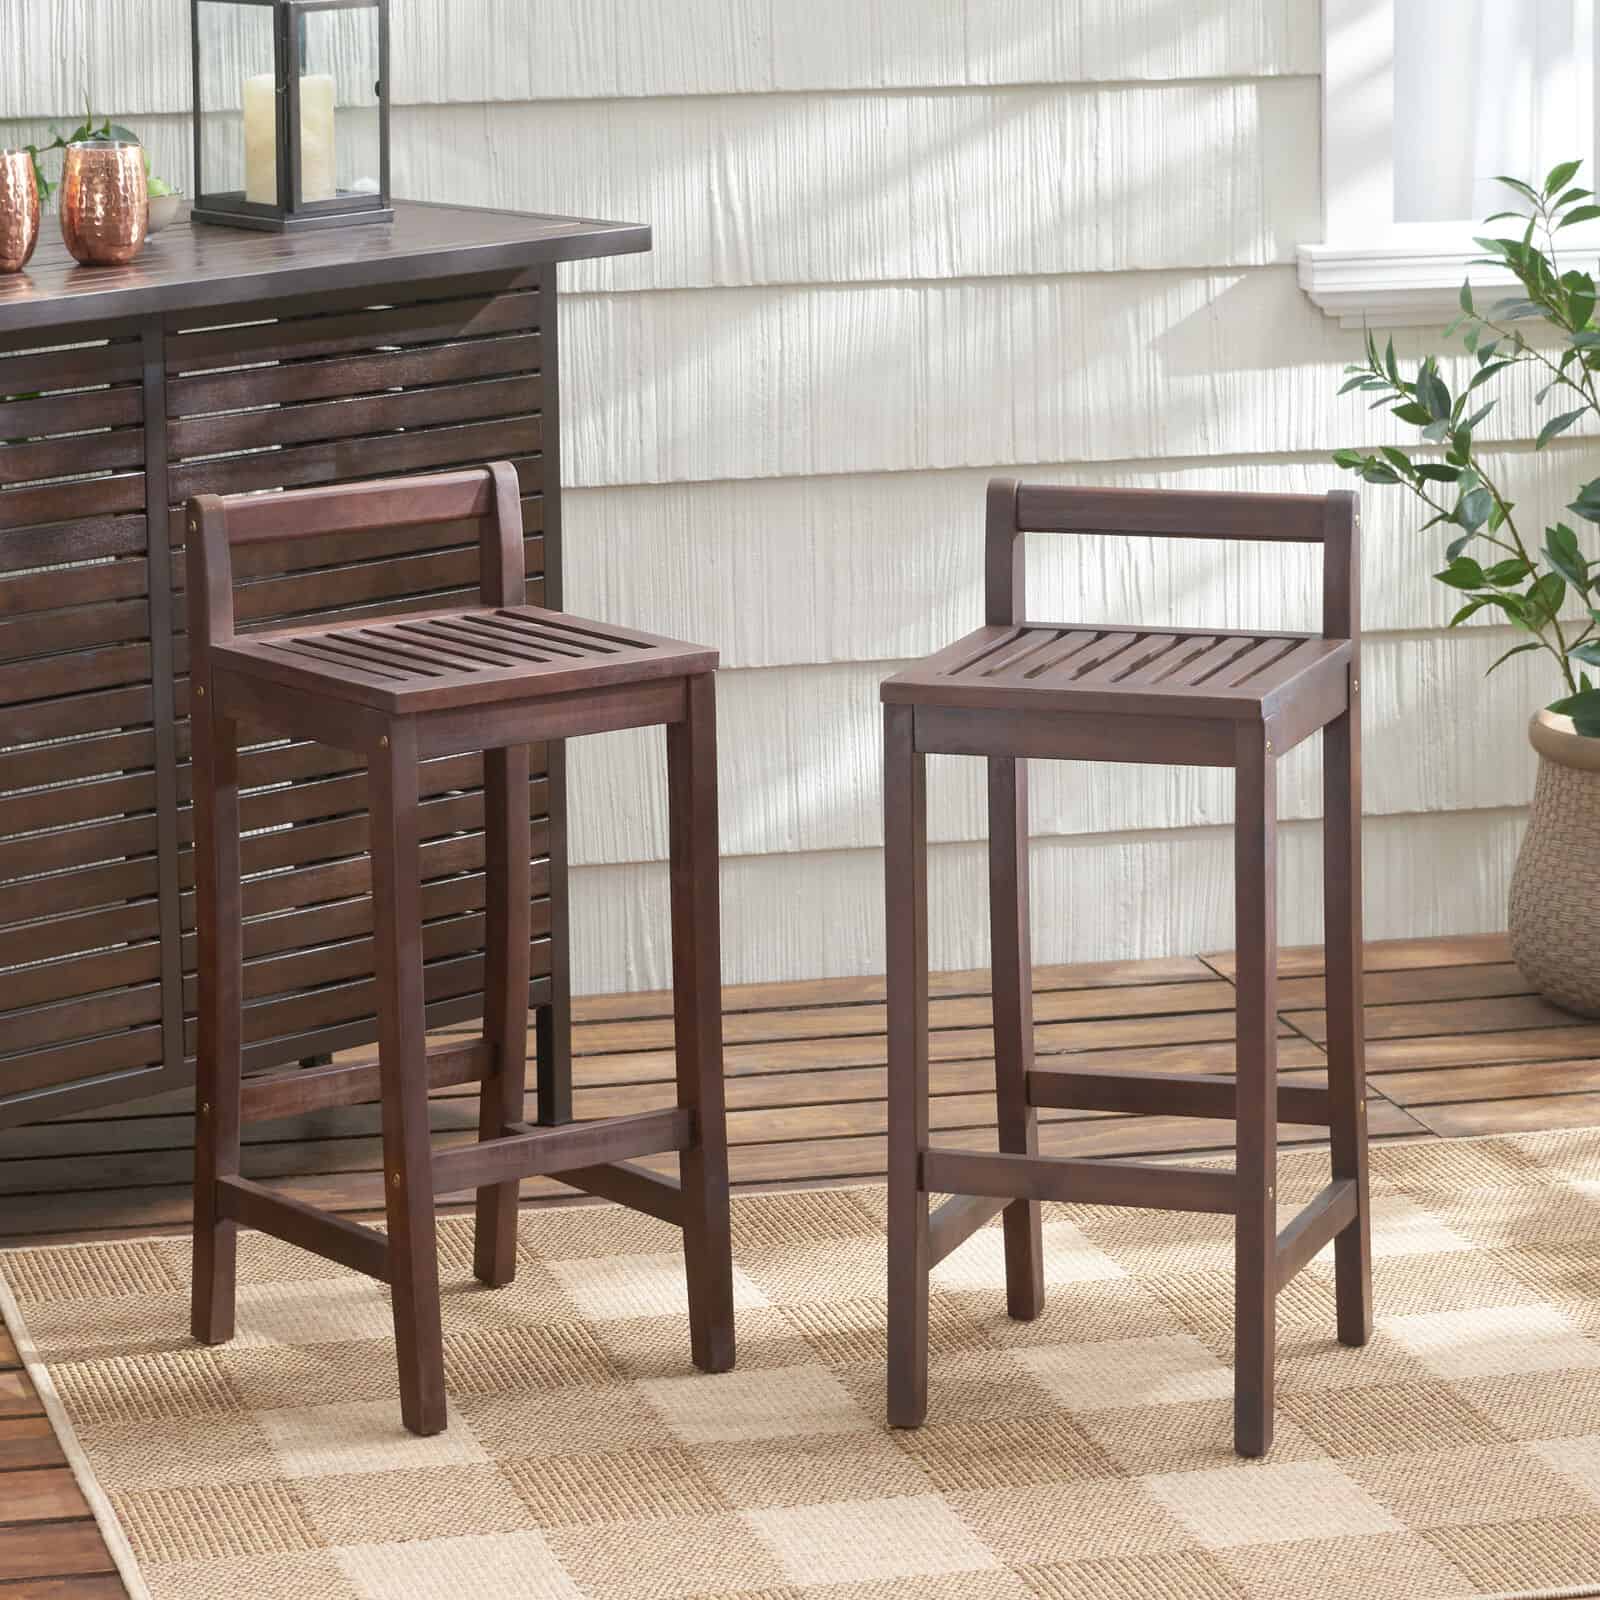 Two wooden bar stools on a wooden floor.